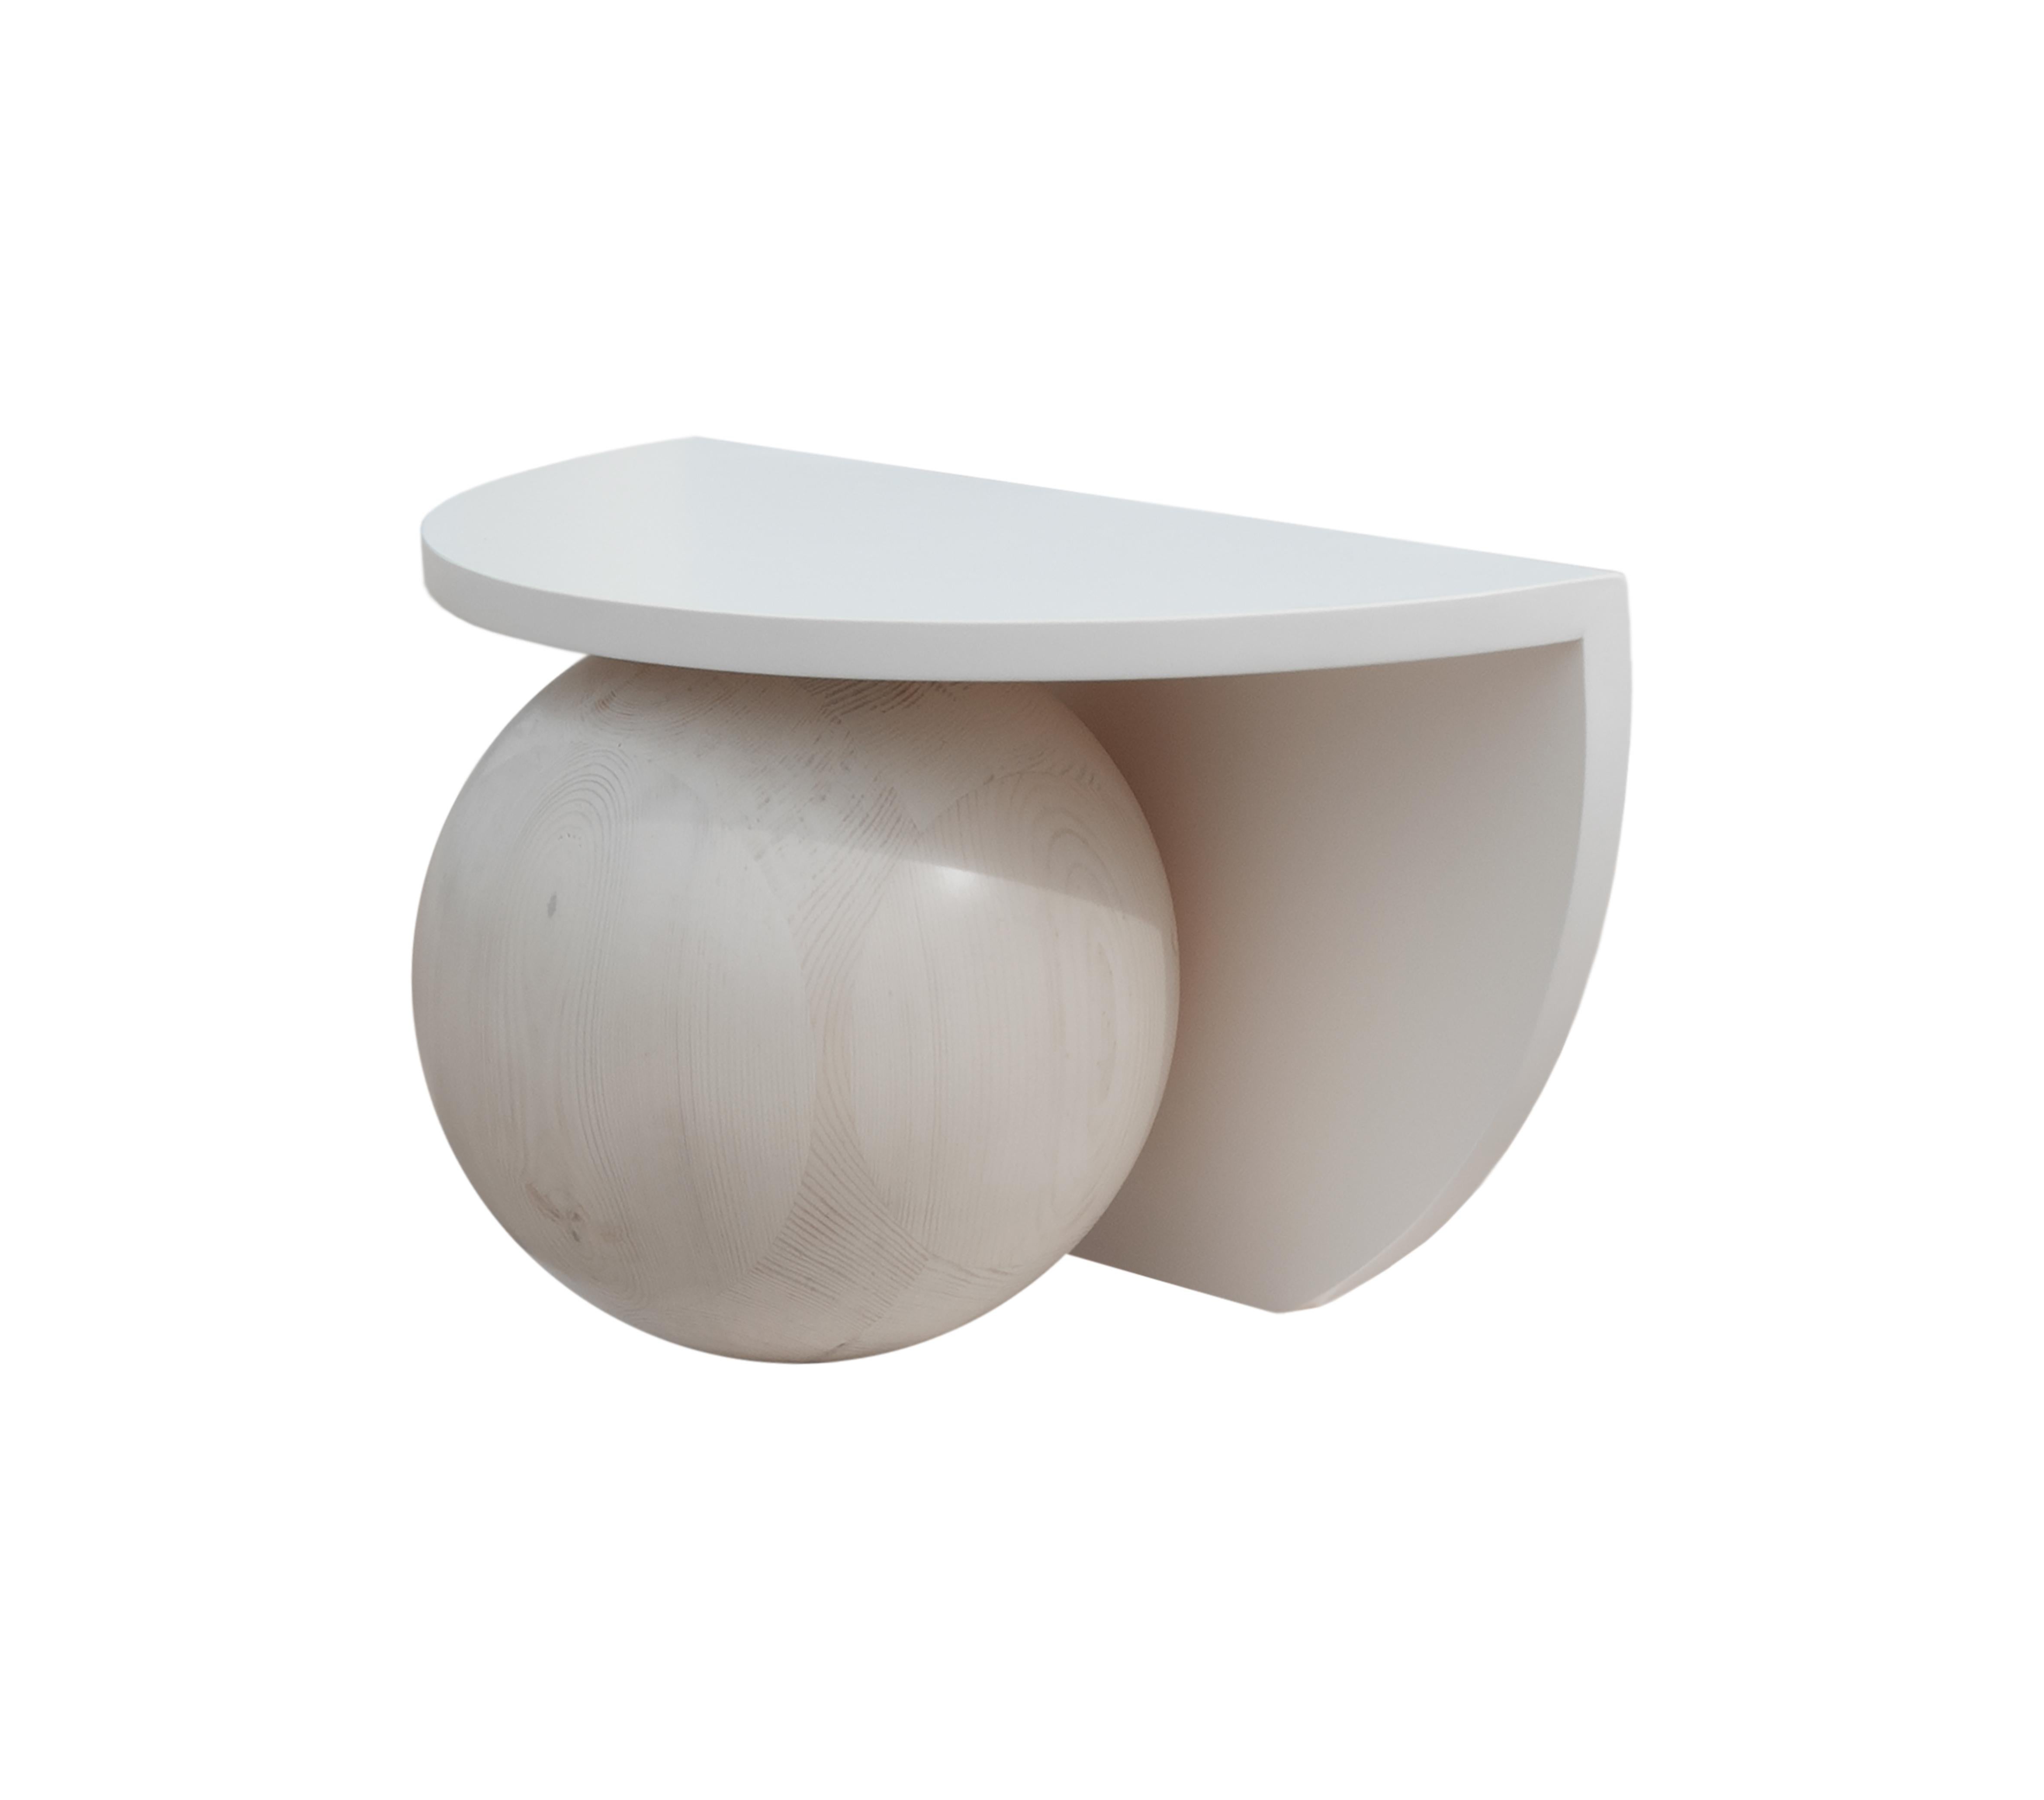 MDF surfaces and Swedish pine solid wood spheres lacquered in creamy beige colour. Manufactured by local artisans in Cyprus.

This compact low level piece elaborates the curved profiles of the series in three dimensions. made out of two intersecting